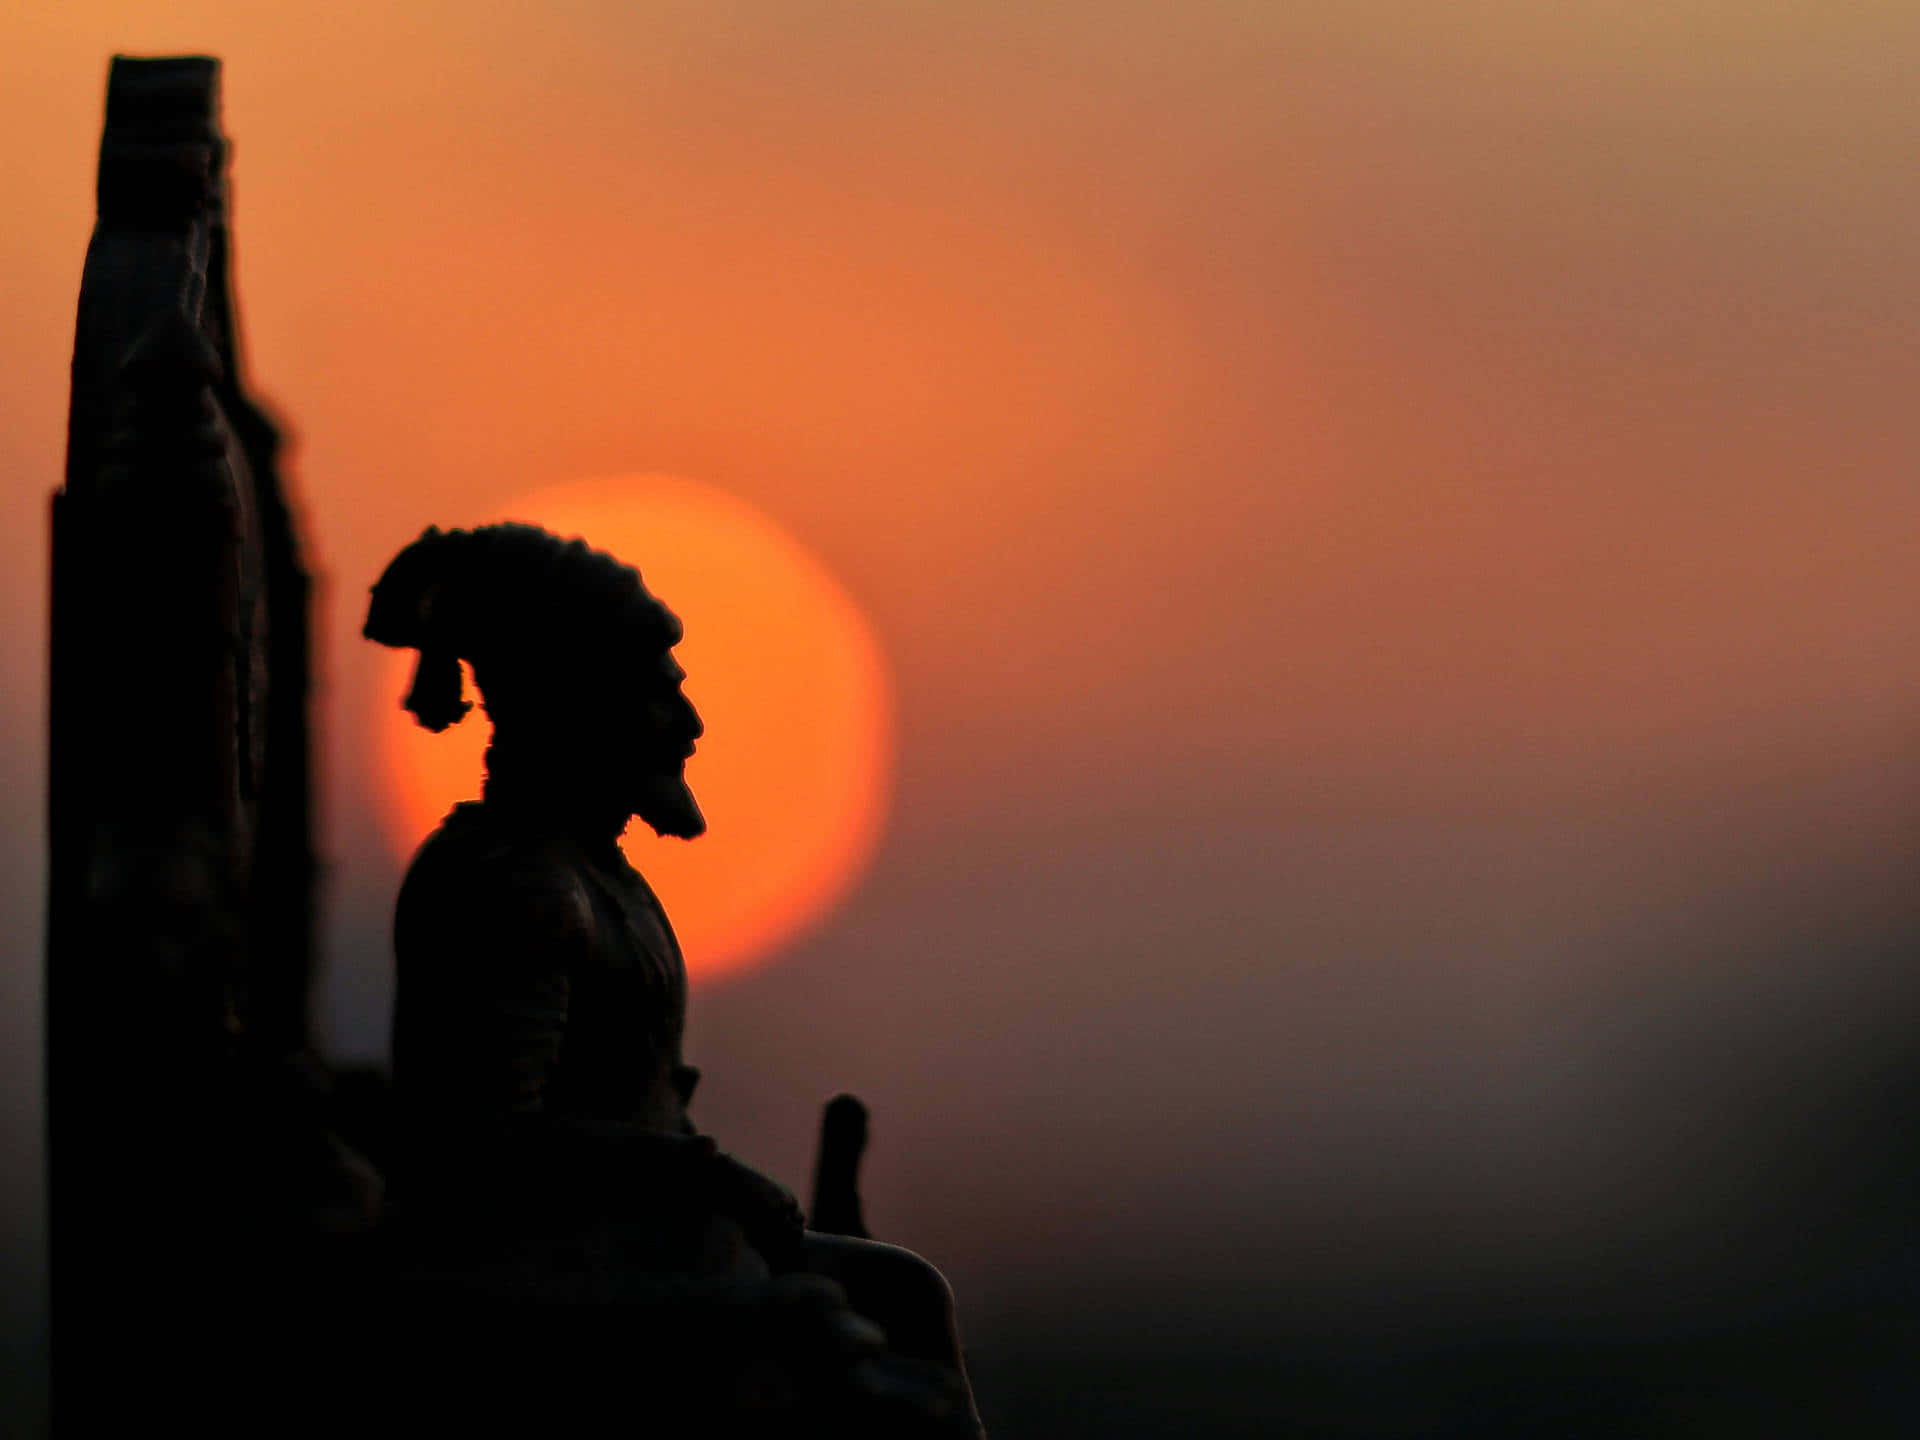 A Statue Of A Man Sitting In Front Of A Sunset